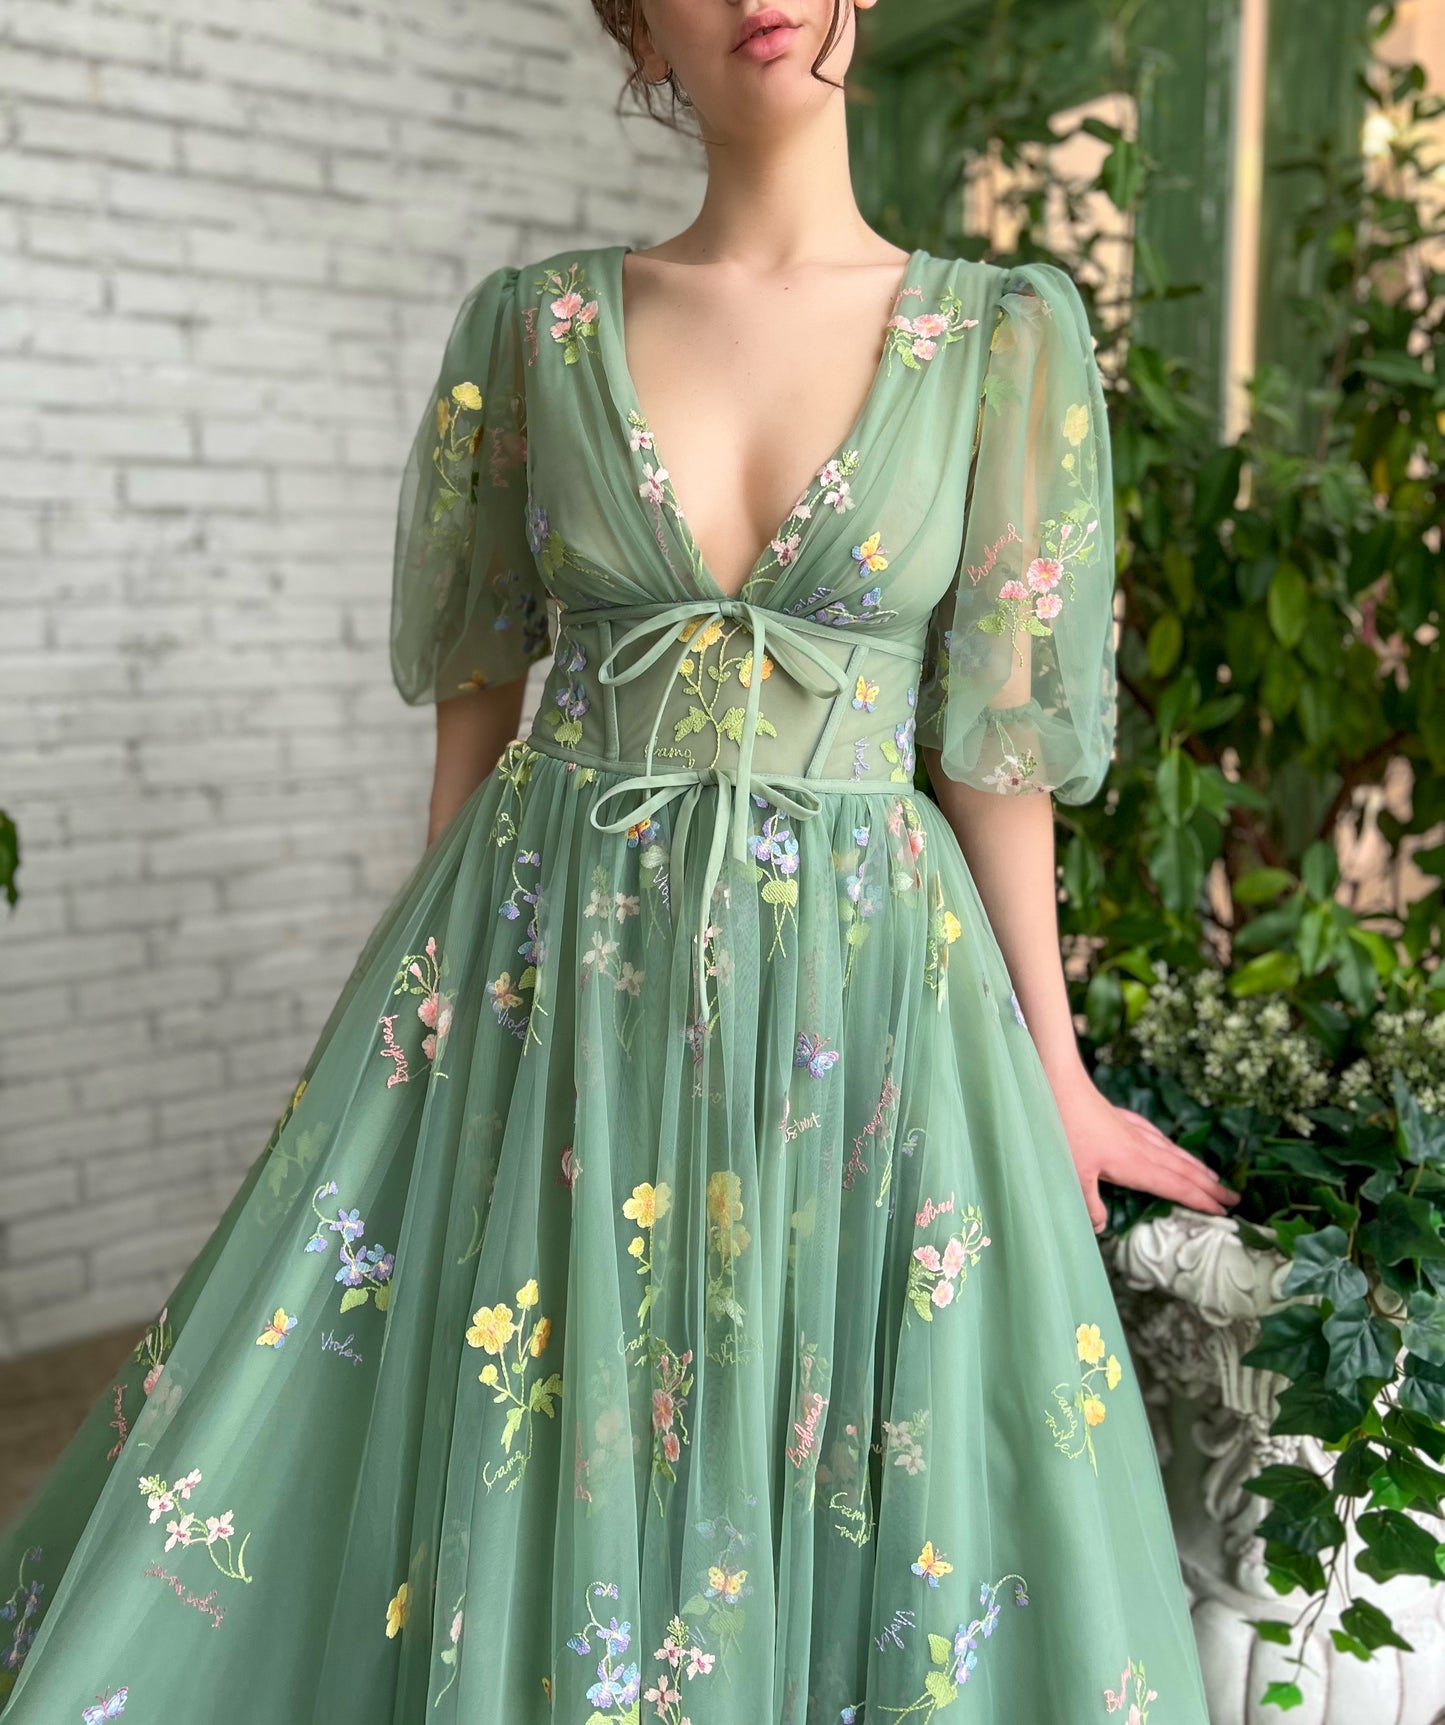 Green A-Line dress with short sleeves, flowers and v-neck